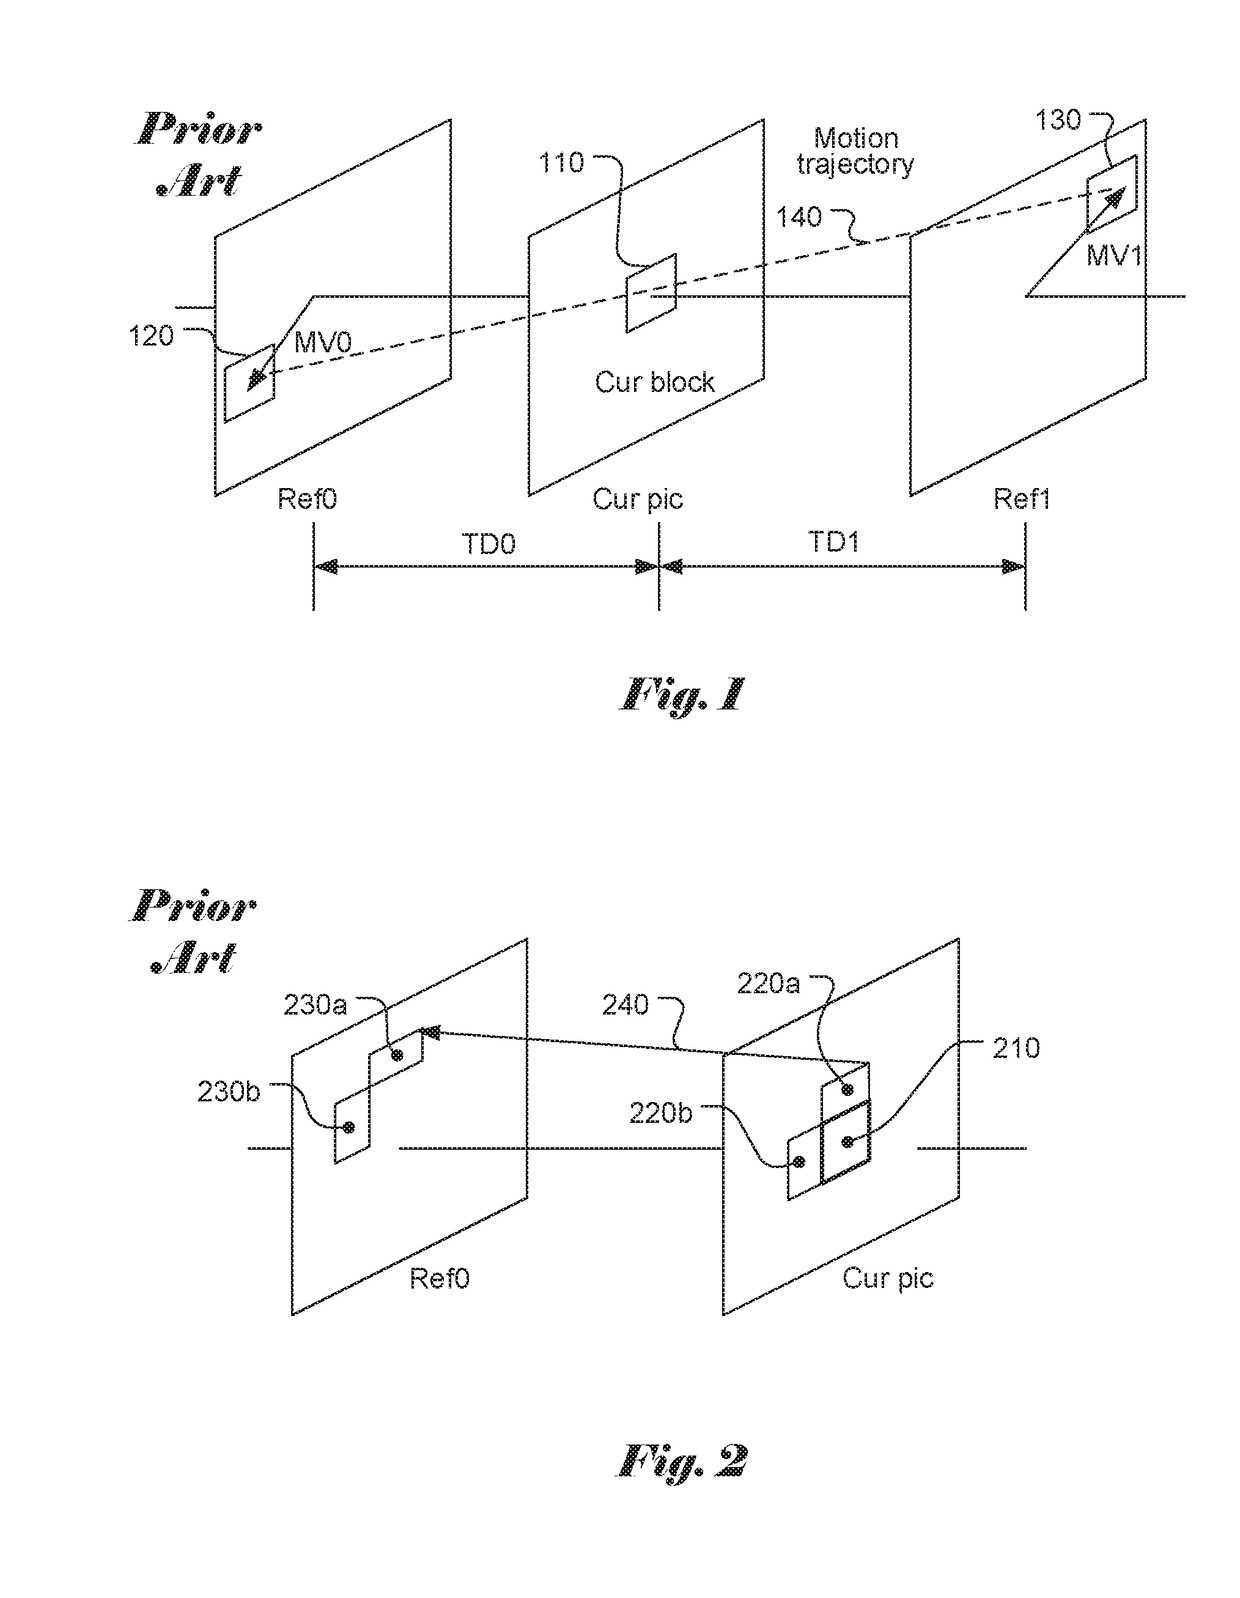 Method and Apparatus of Candidate Skipping for Predictor Refinement in Video Coding